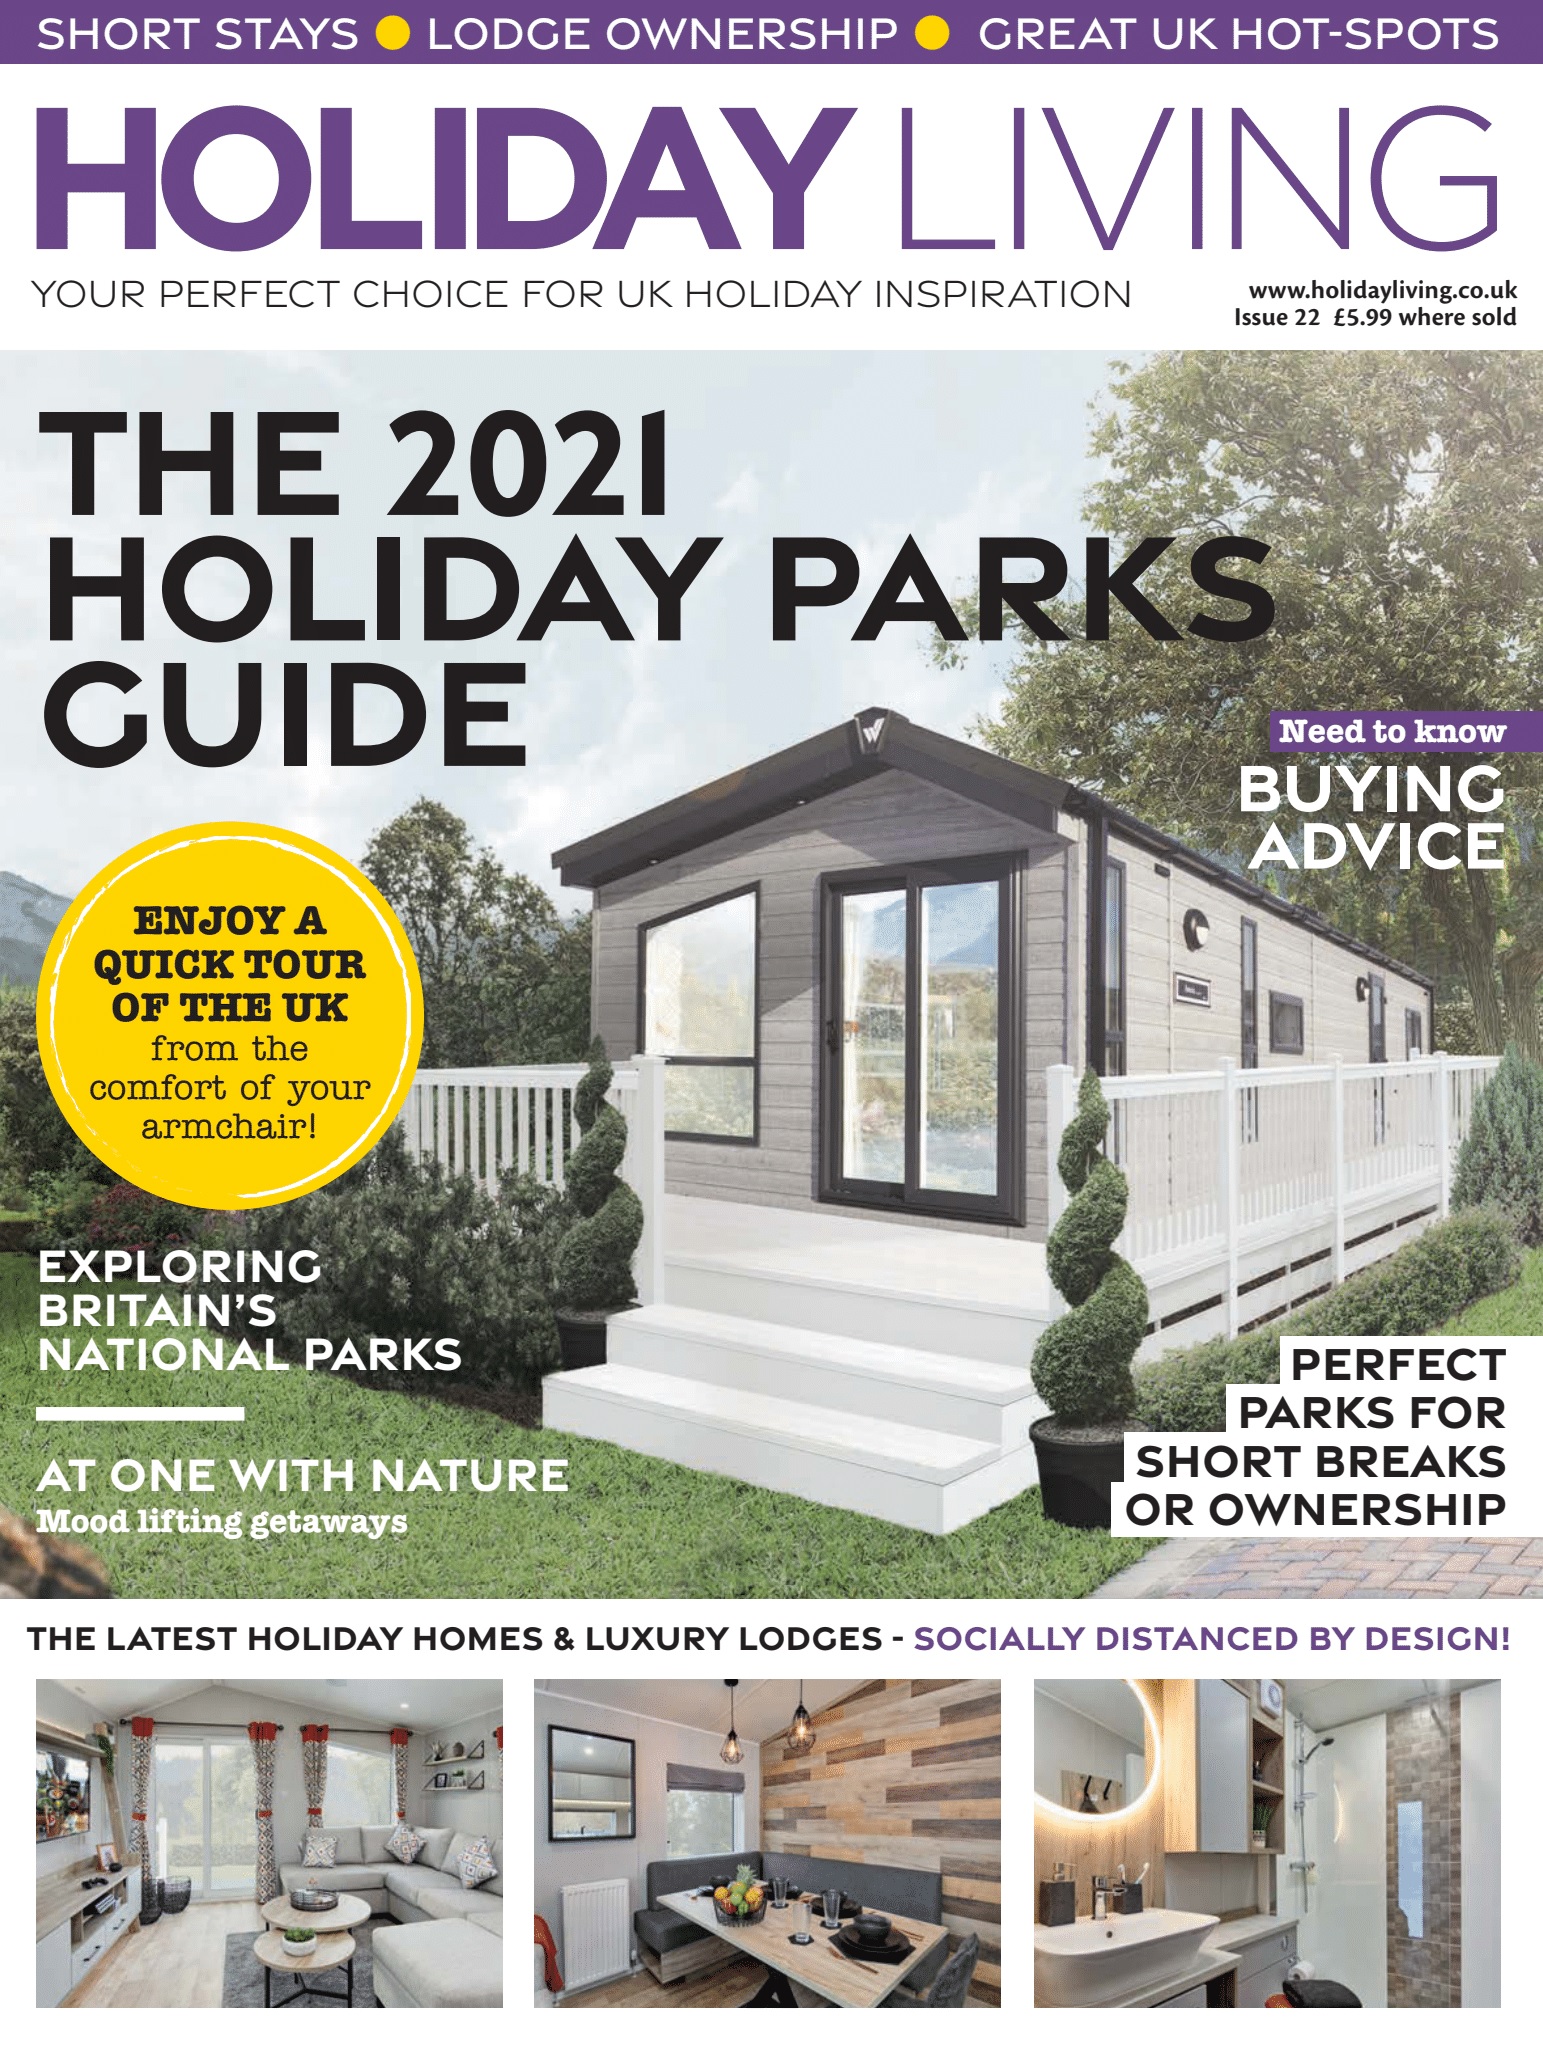 Holiday Living #22 - The 2021 Holiday Parks Guide